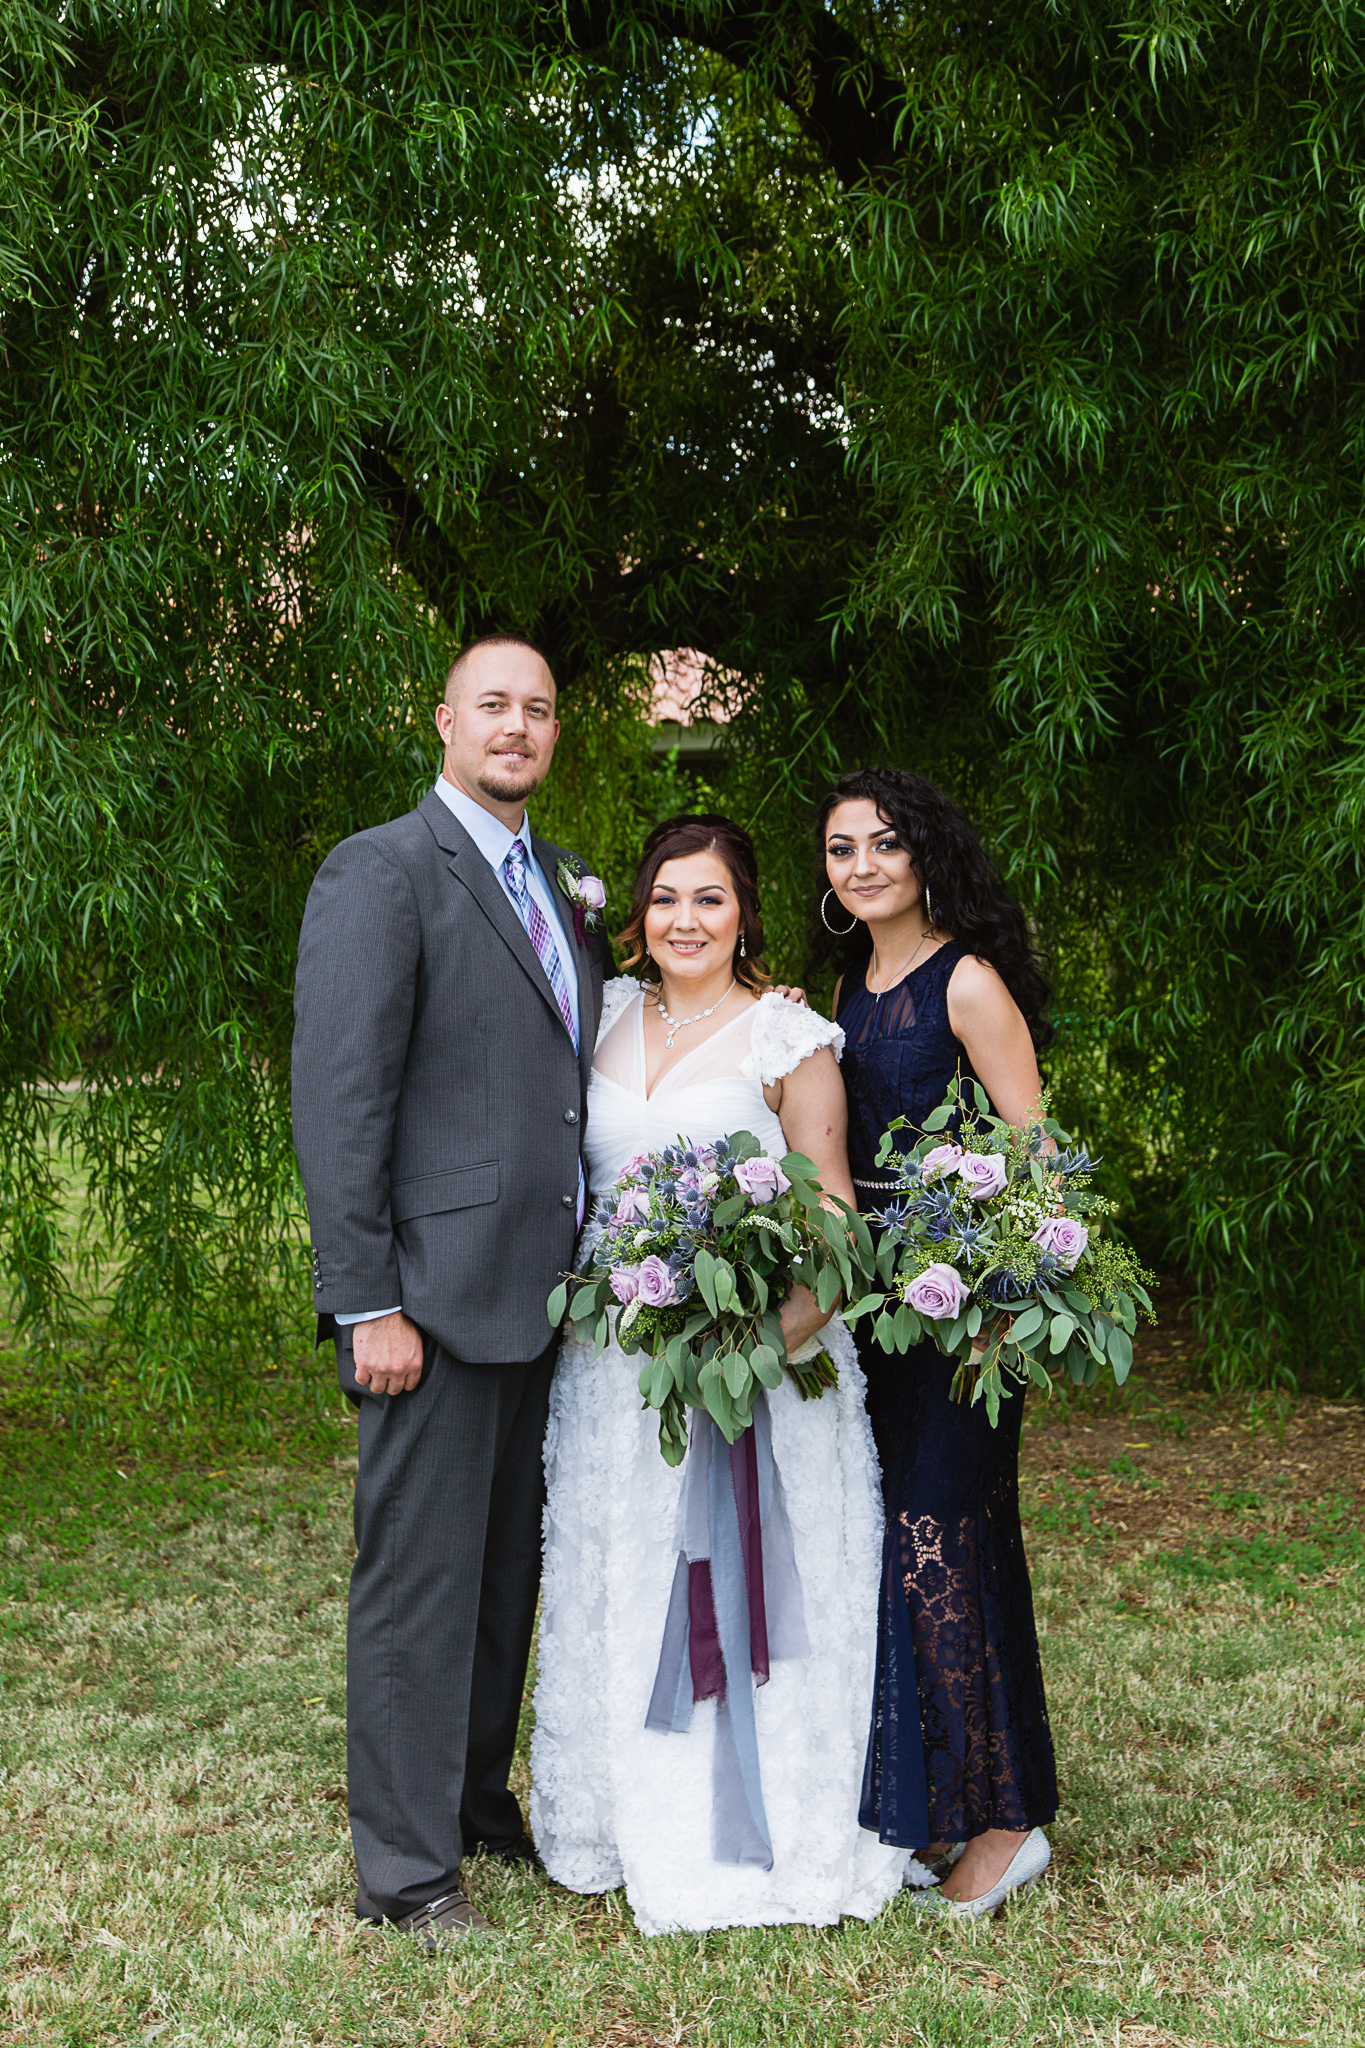 Bride and groom with their daughter on their wedding day by PMA Photography.